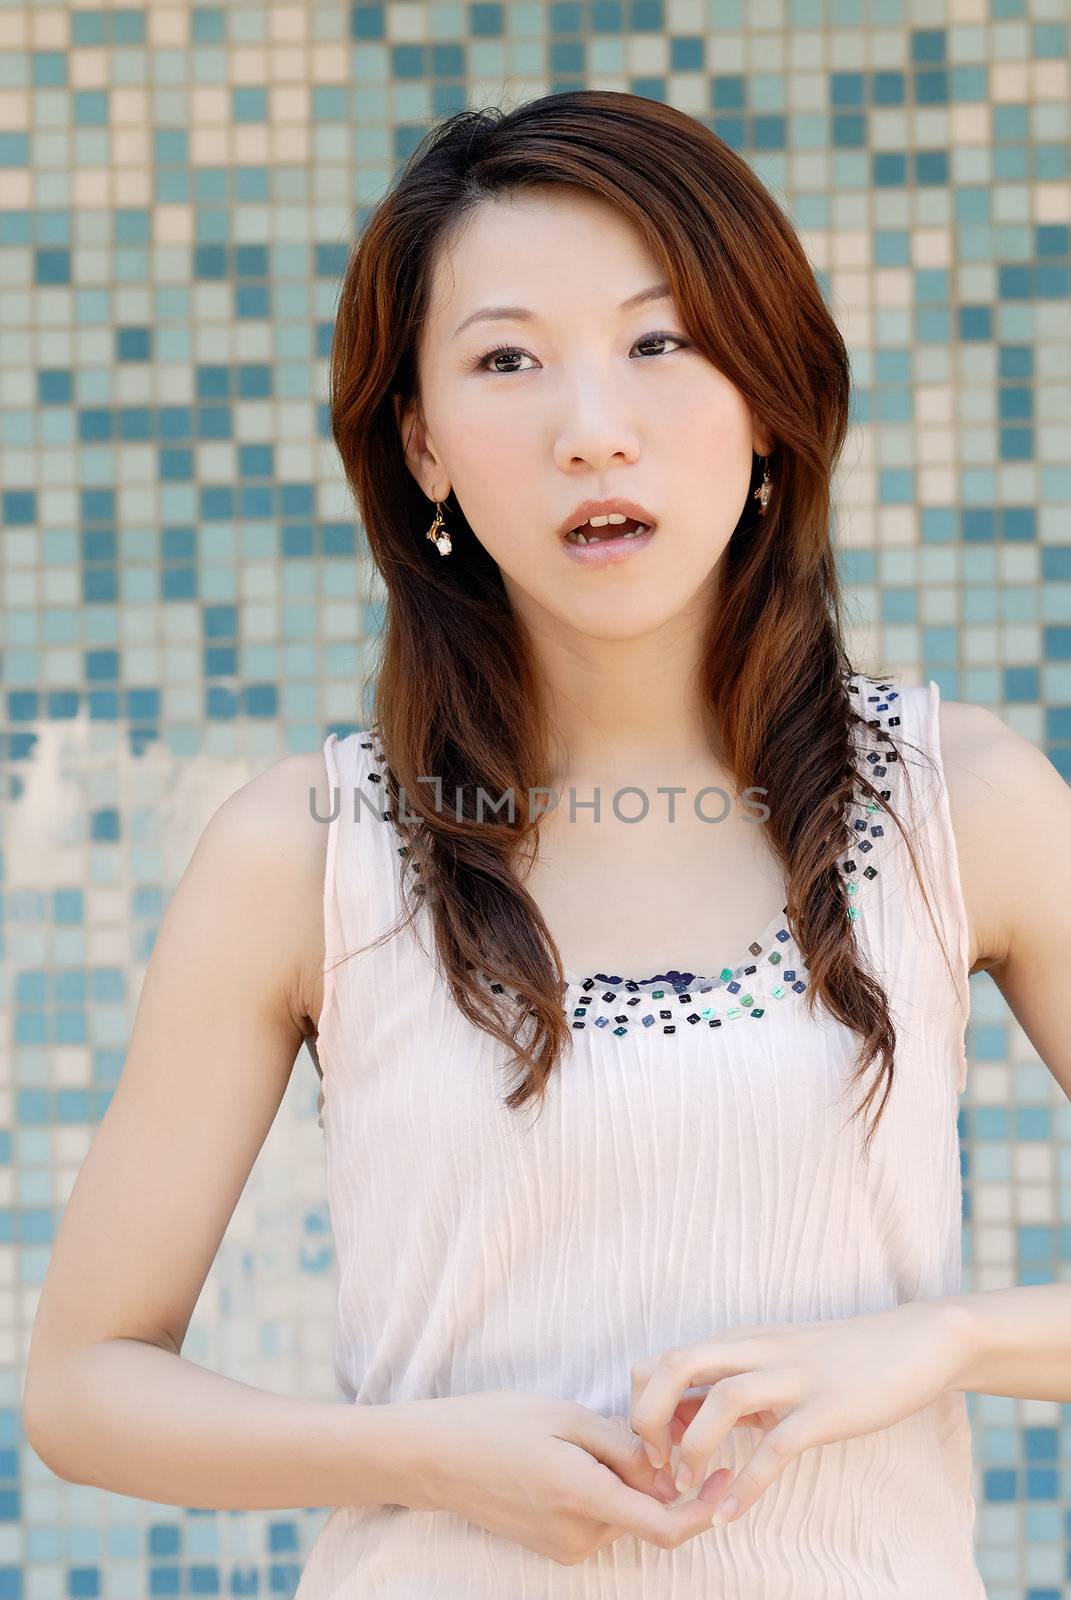 Here is a beautiful Asian lady in front of mosaic and think.